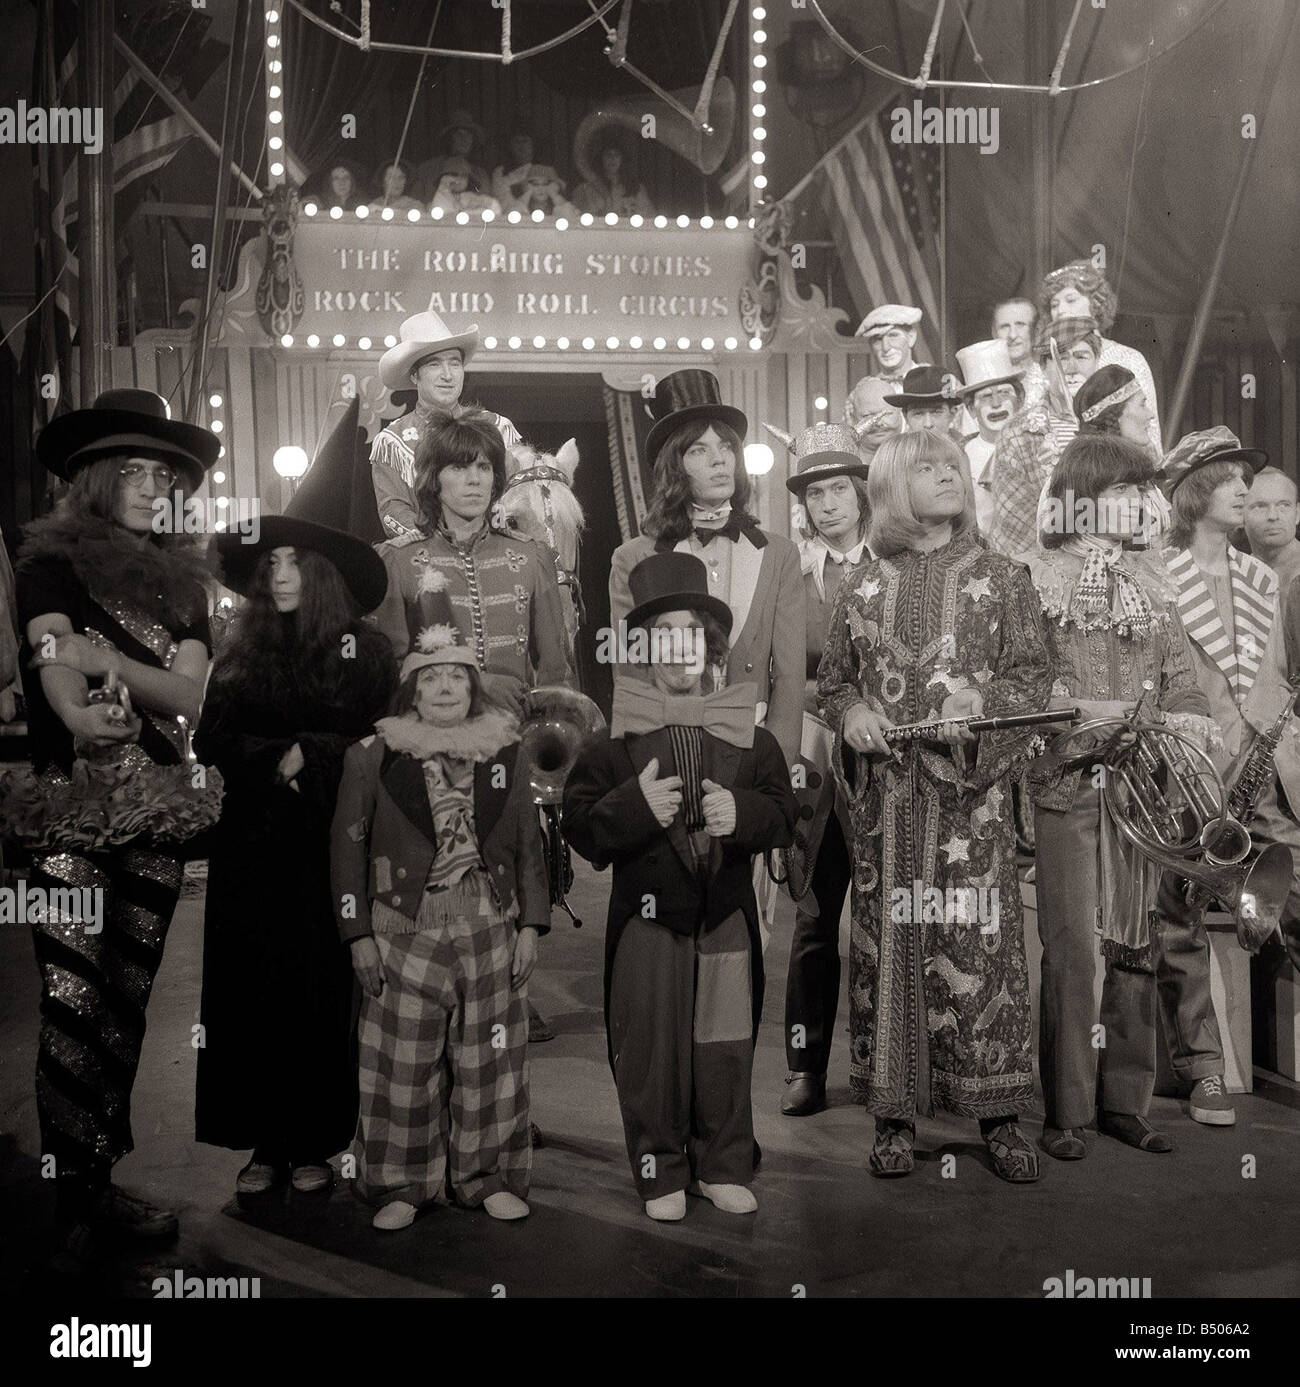 The Rolling Stones December 1968 Pictured after recording their Rock and Roll Circus Show at the Intertel Studios in Wembley London specially recorded for screening over ChristmasMick Jagger Dressed as Ringmaster John Lennon Yoko Ono Keith Richards Charlie Watts Brian Jones Bill Wyman Entertainment Music Studio Groups Circus Performers 1960s Stock Photo